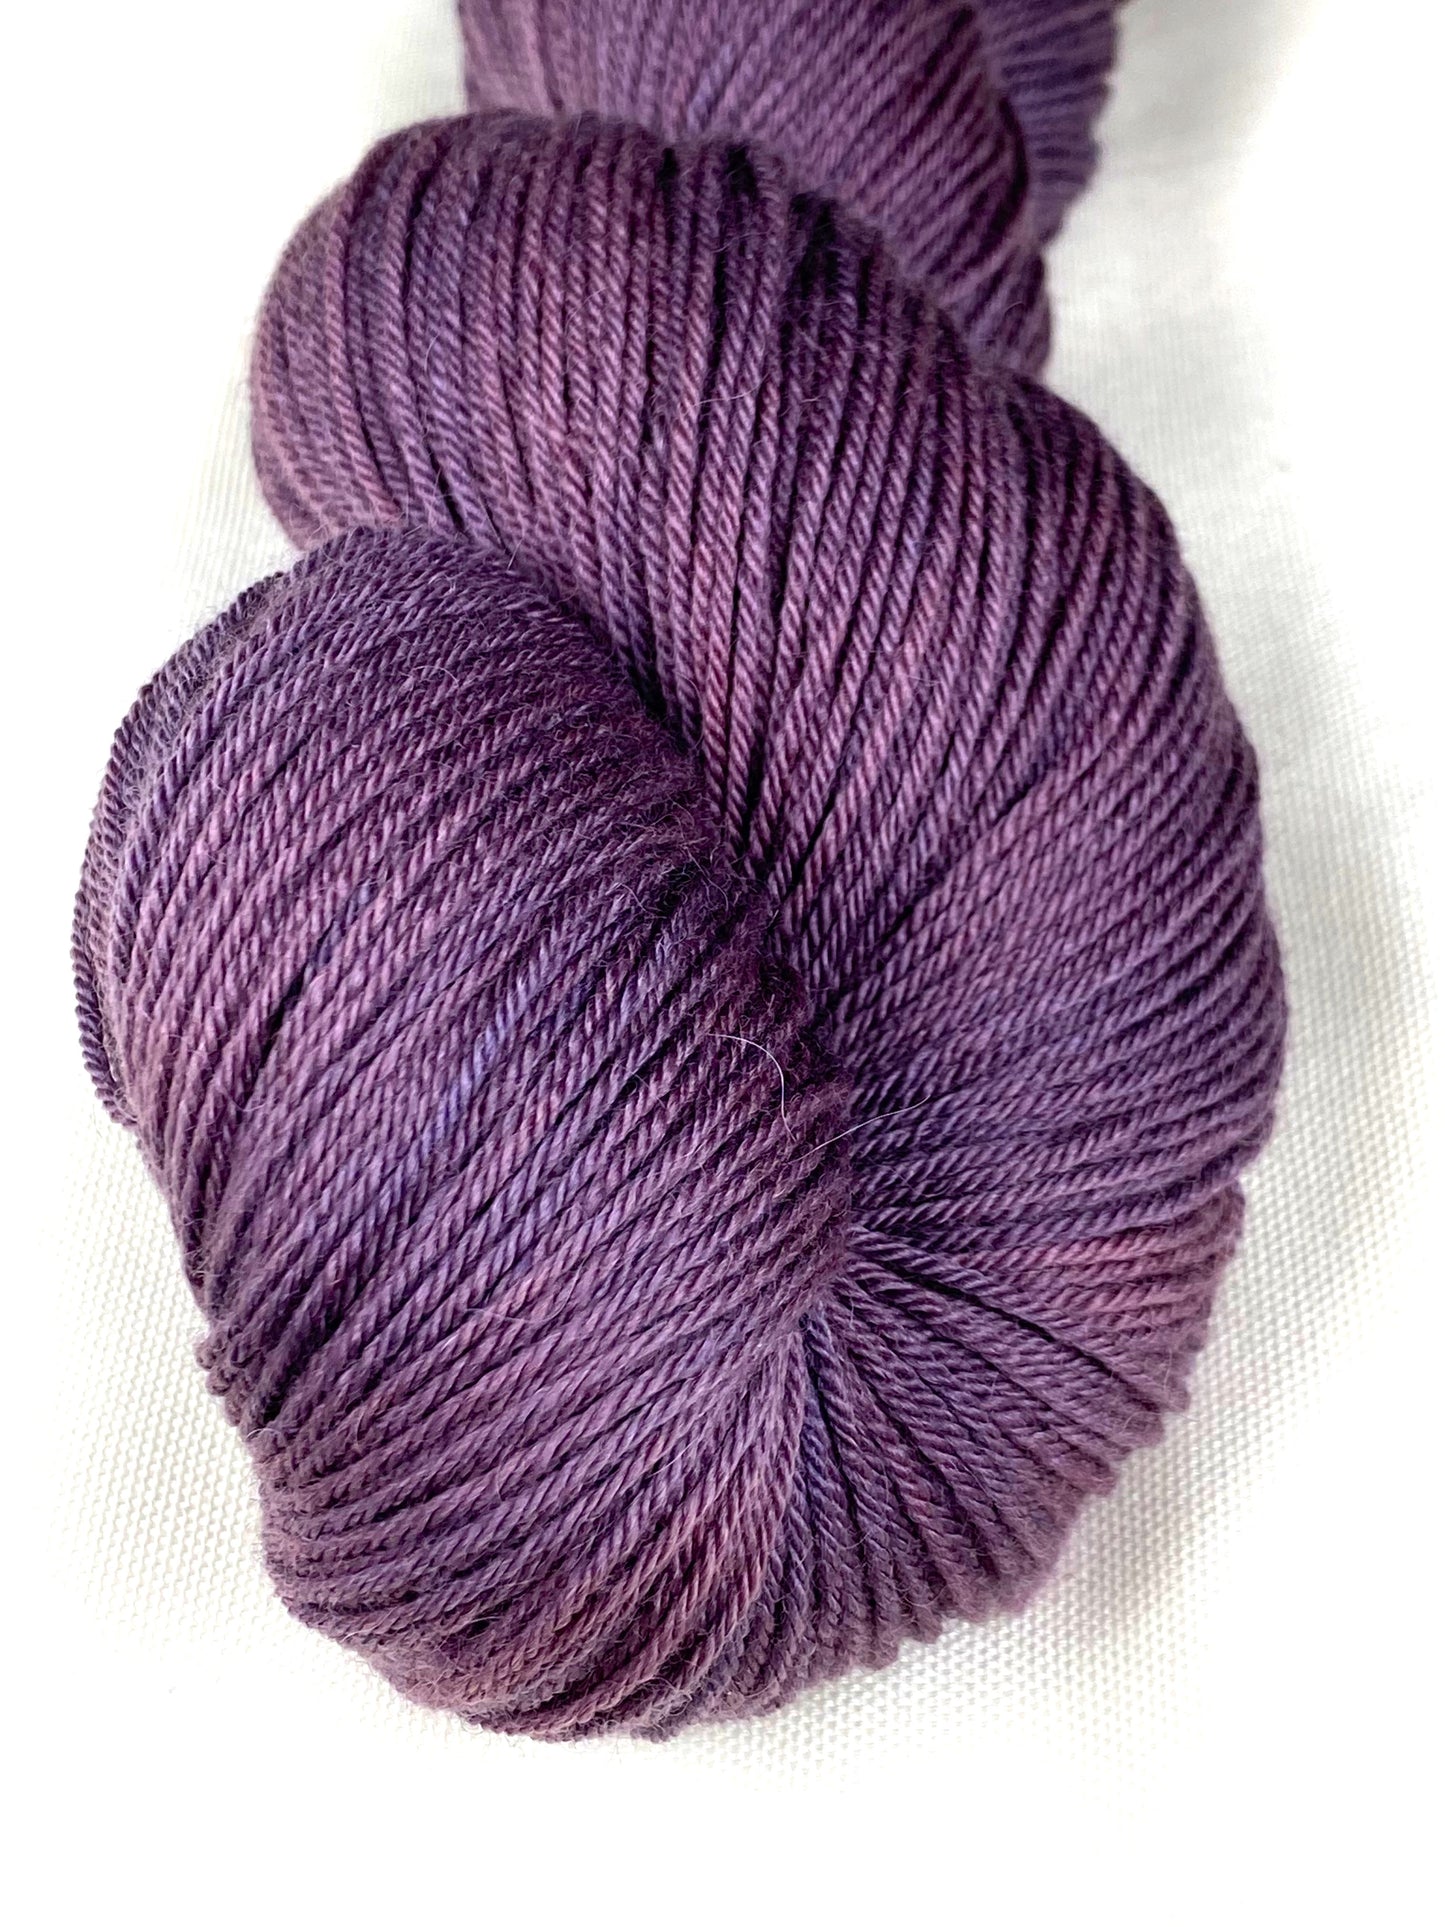 Royal Select Fingering Weight
/ Rosy Paintbrush